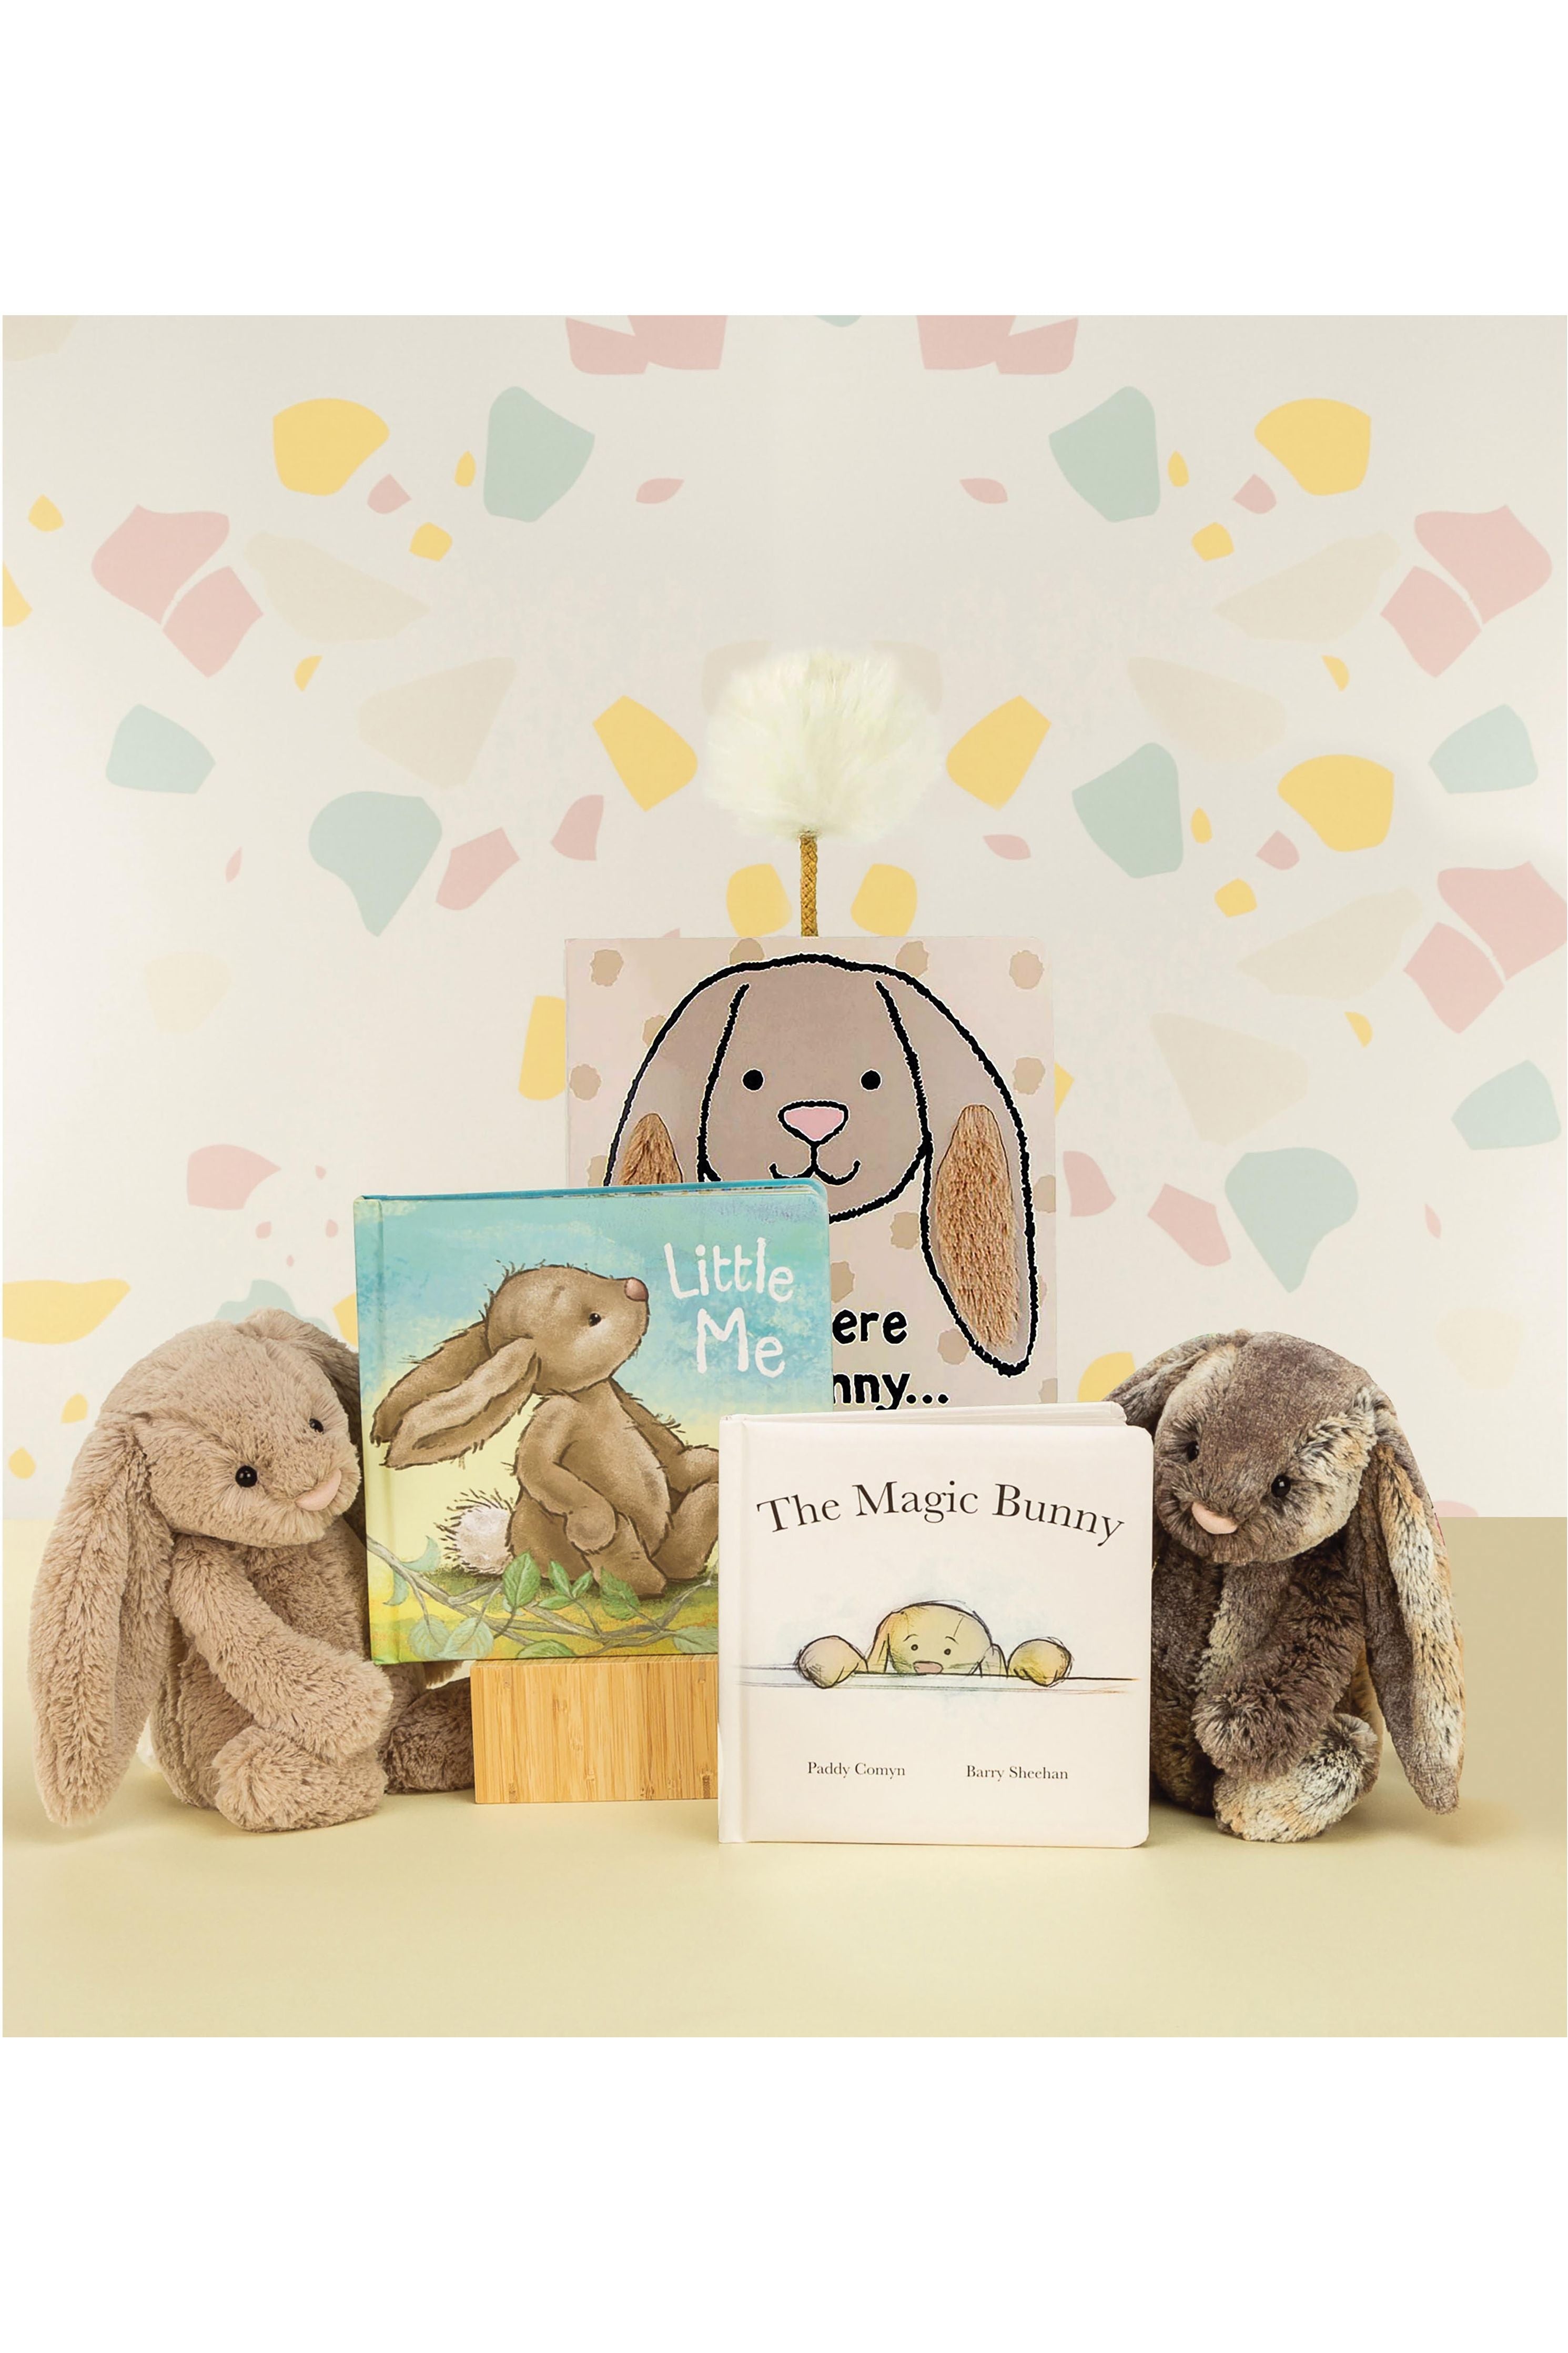 Jellycat Books - If I were a bunny